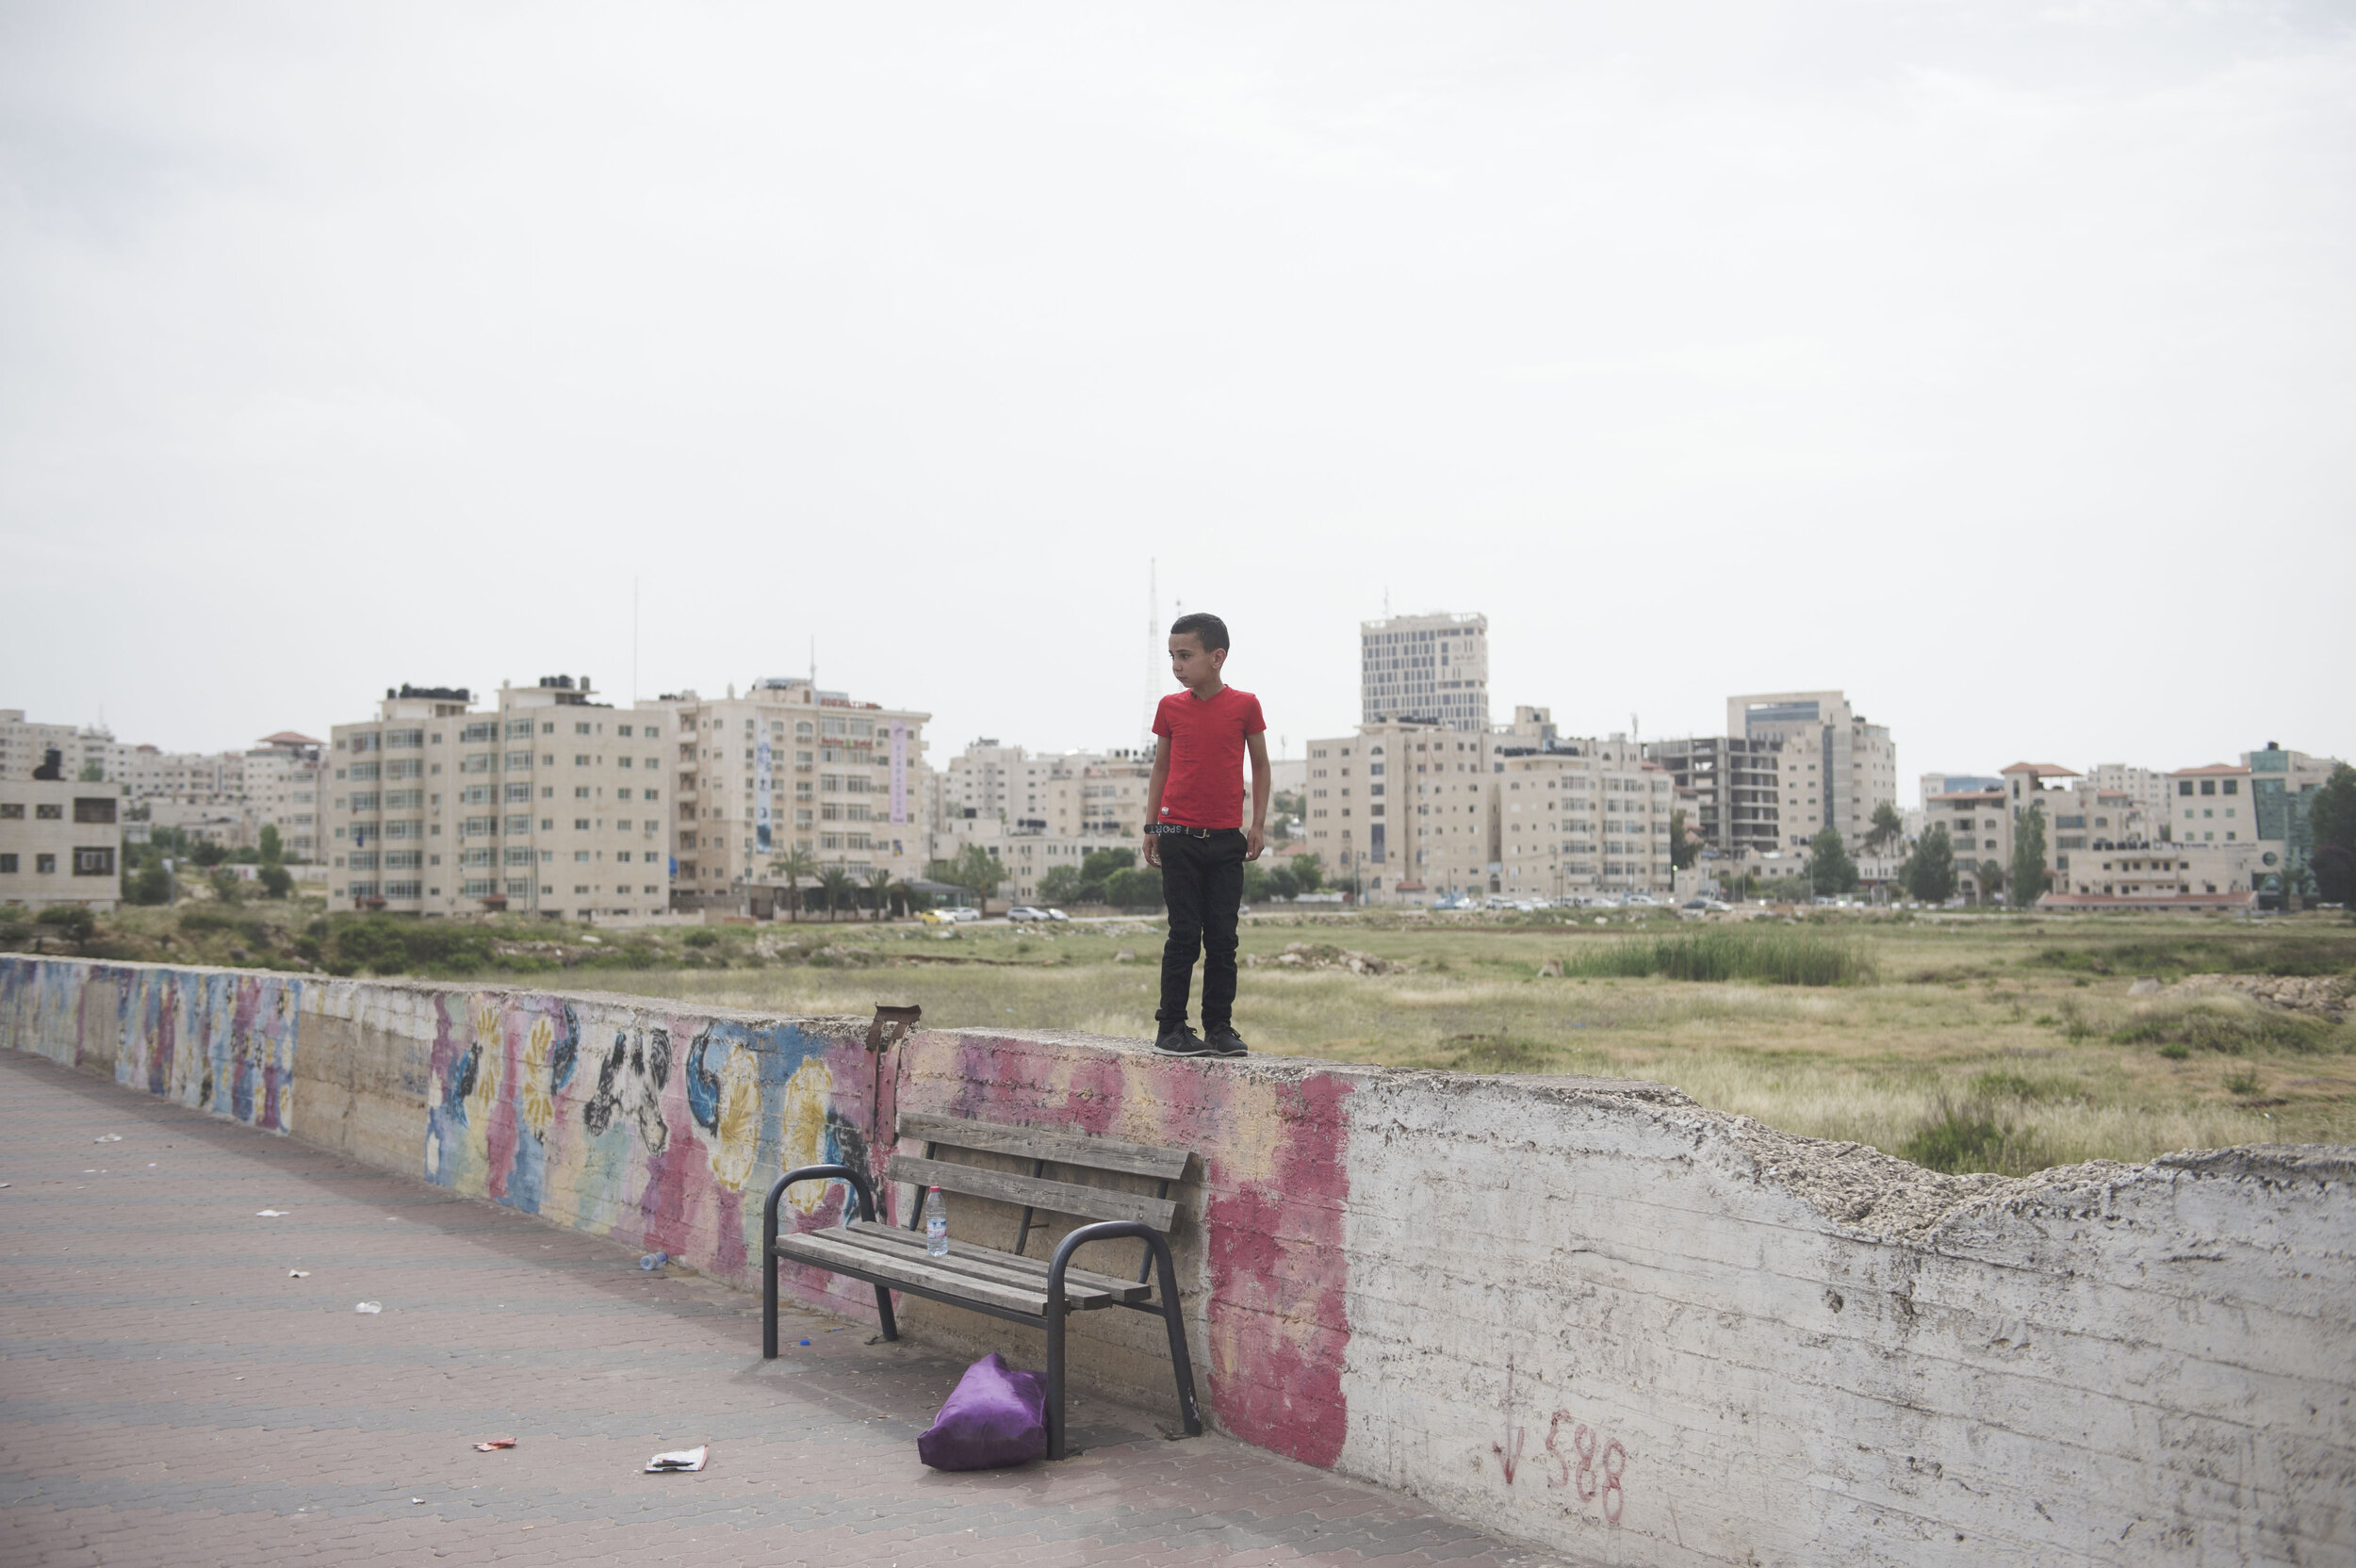  A child plays by himself on an empty street in the hours before heavy clashes between Israeli troops and Palestinian protesters erupt in Beit-El in the Occupied West Bank. 